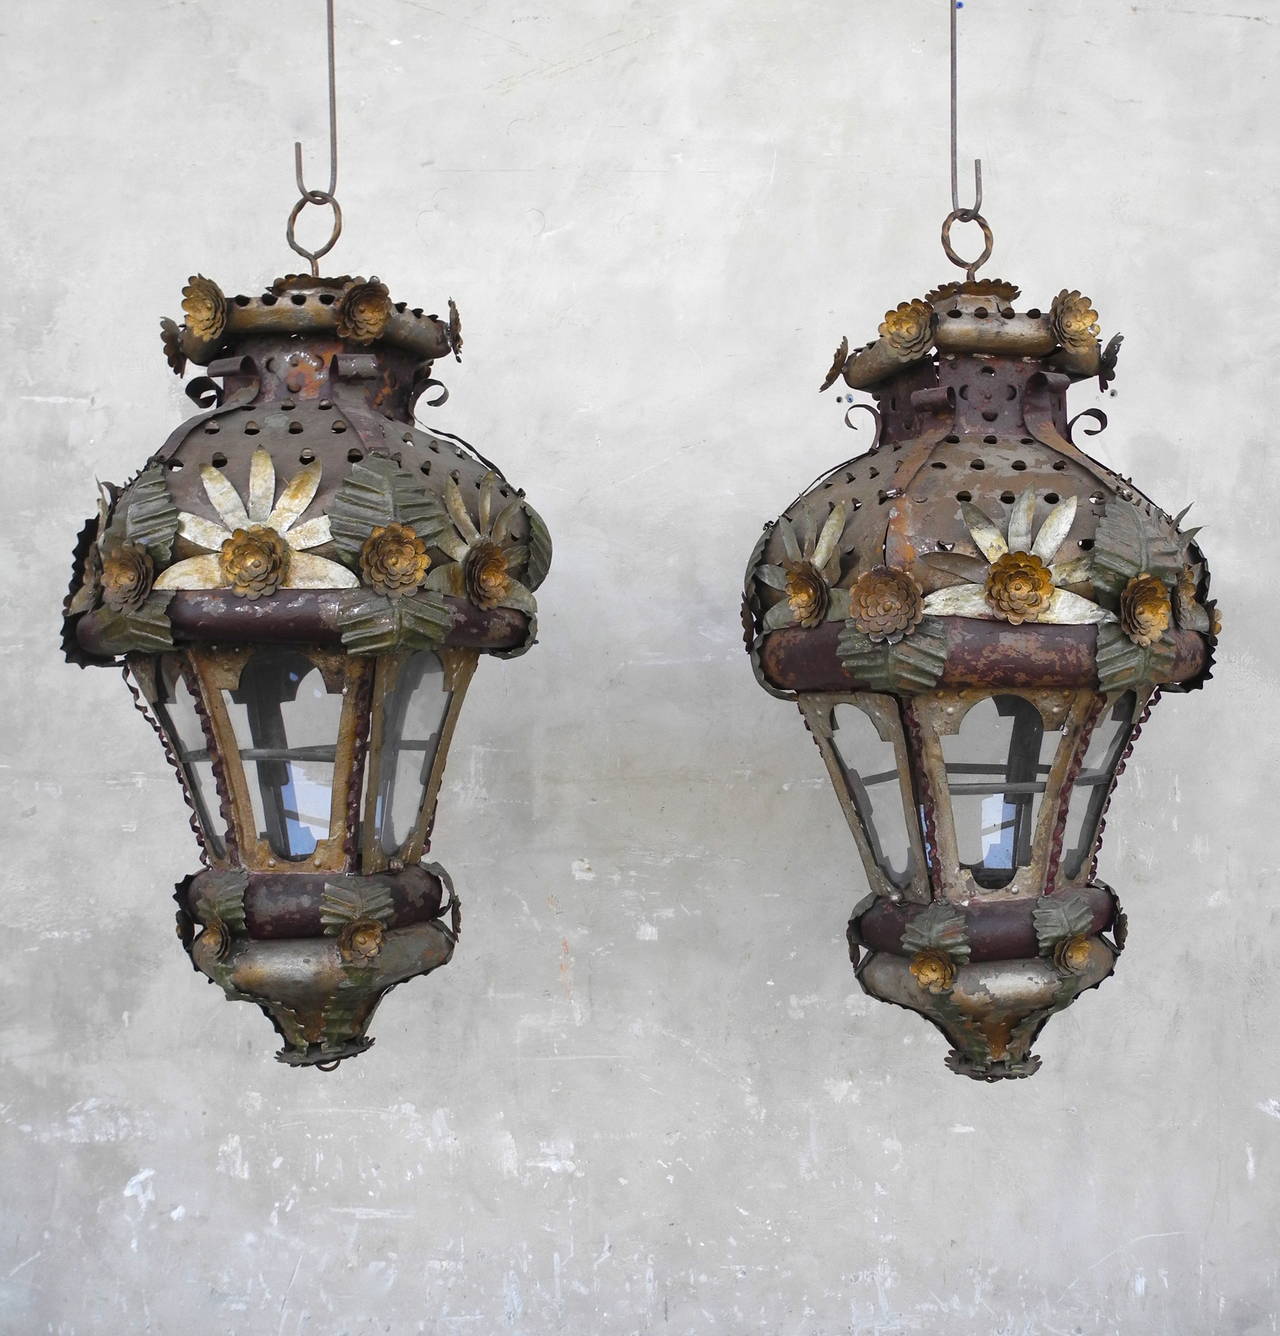 Pair of Venetian tole lanterns from the entrance arch of a villa on the Grand Canal of Venice, circa 1800.